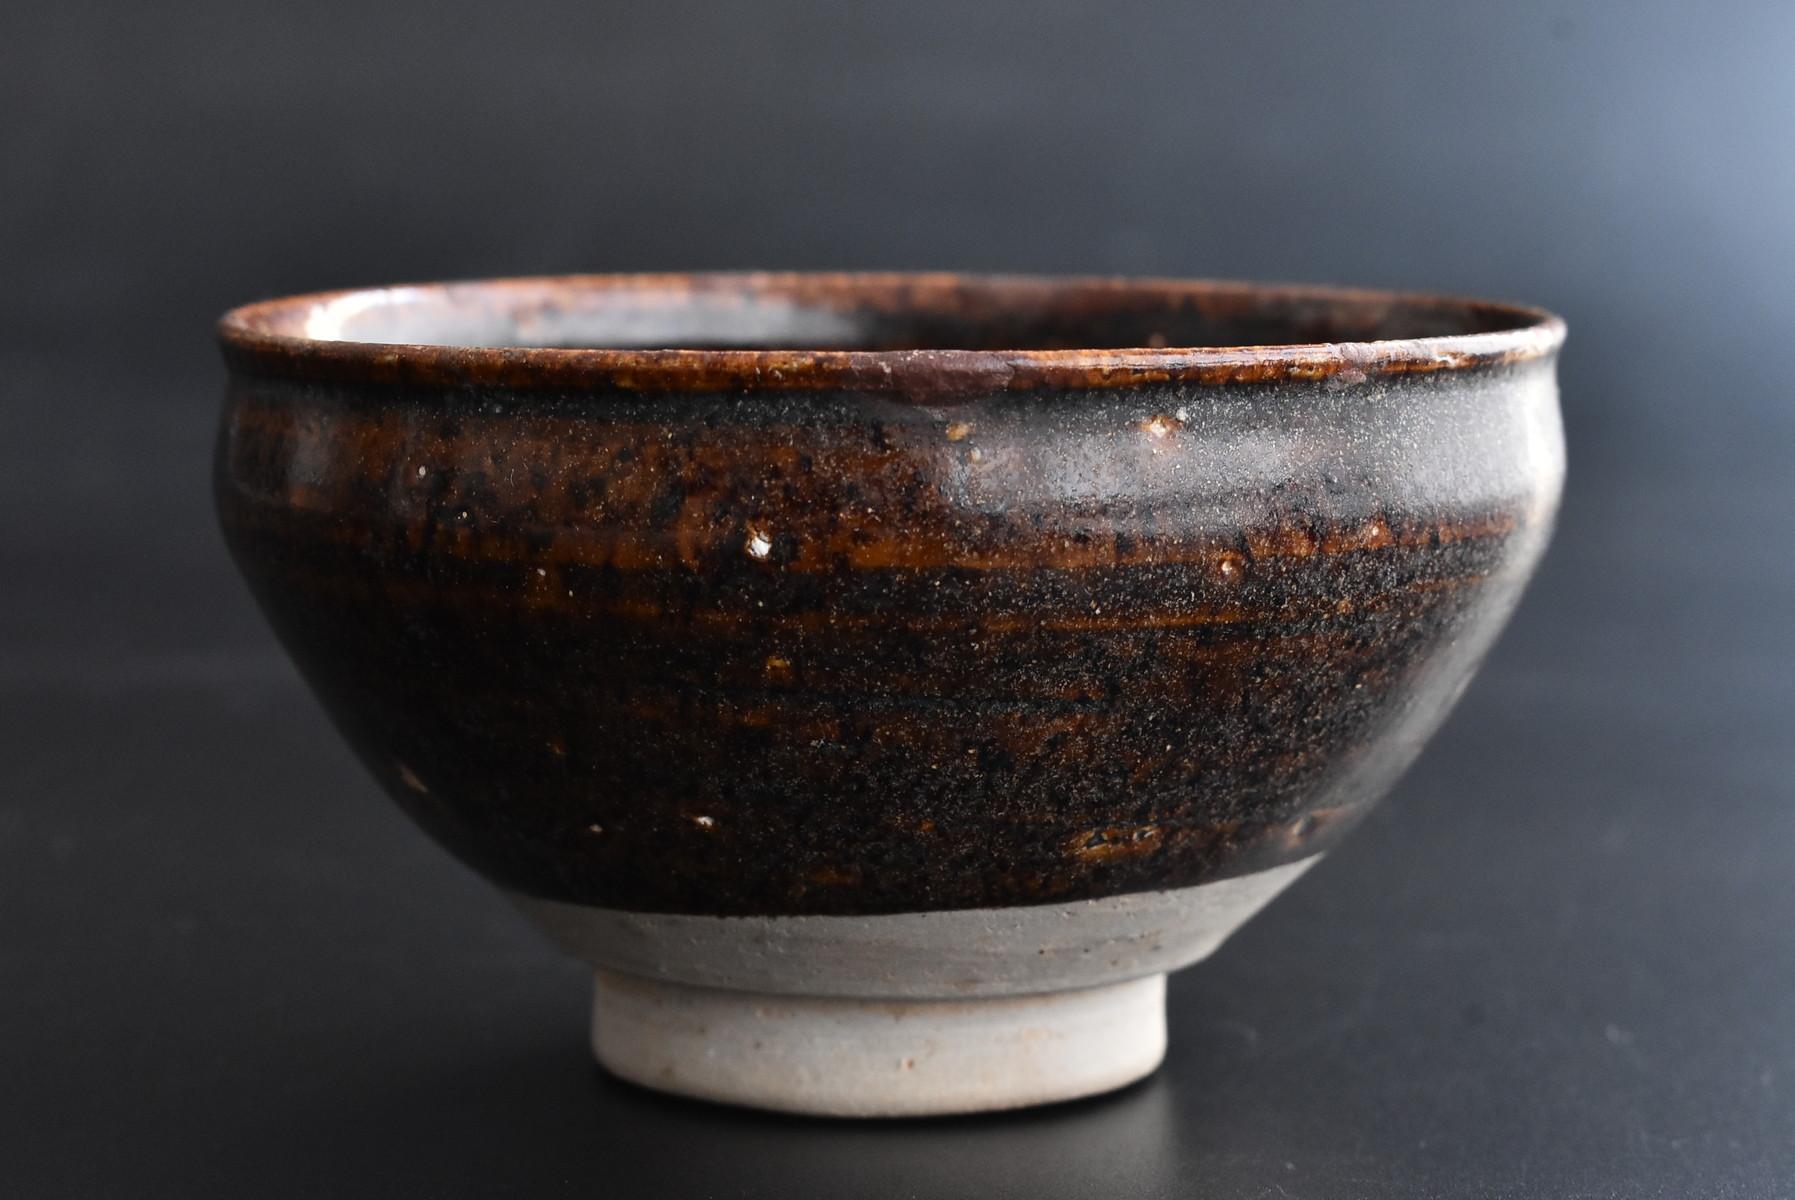 A Mino ware bowl made in Japan from the old Momoyama period to the early Edo period (1573-1650).
Mino ware produced many tea utensils.
Reference materials for art books are posted.

It is baked with a dark brown glaze.
It is a glaze that